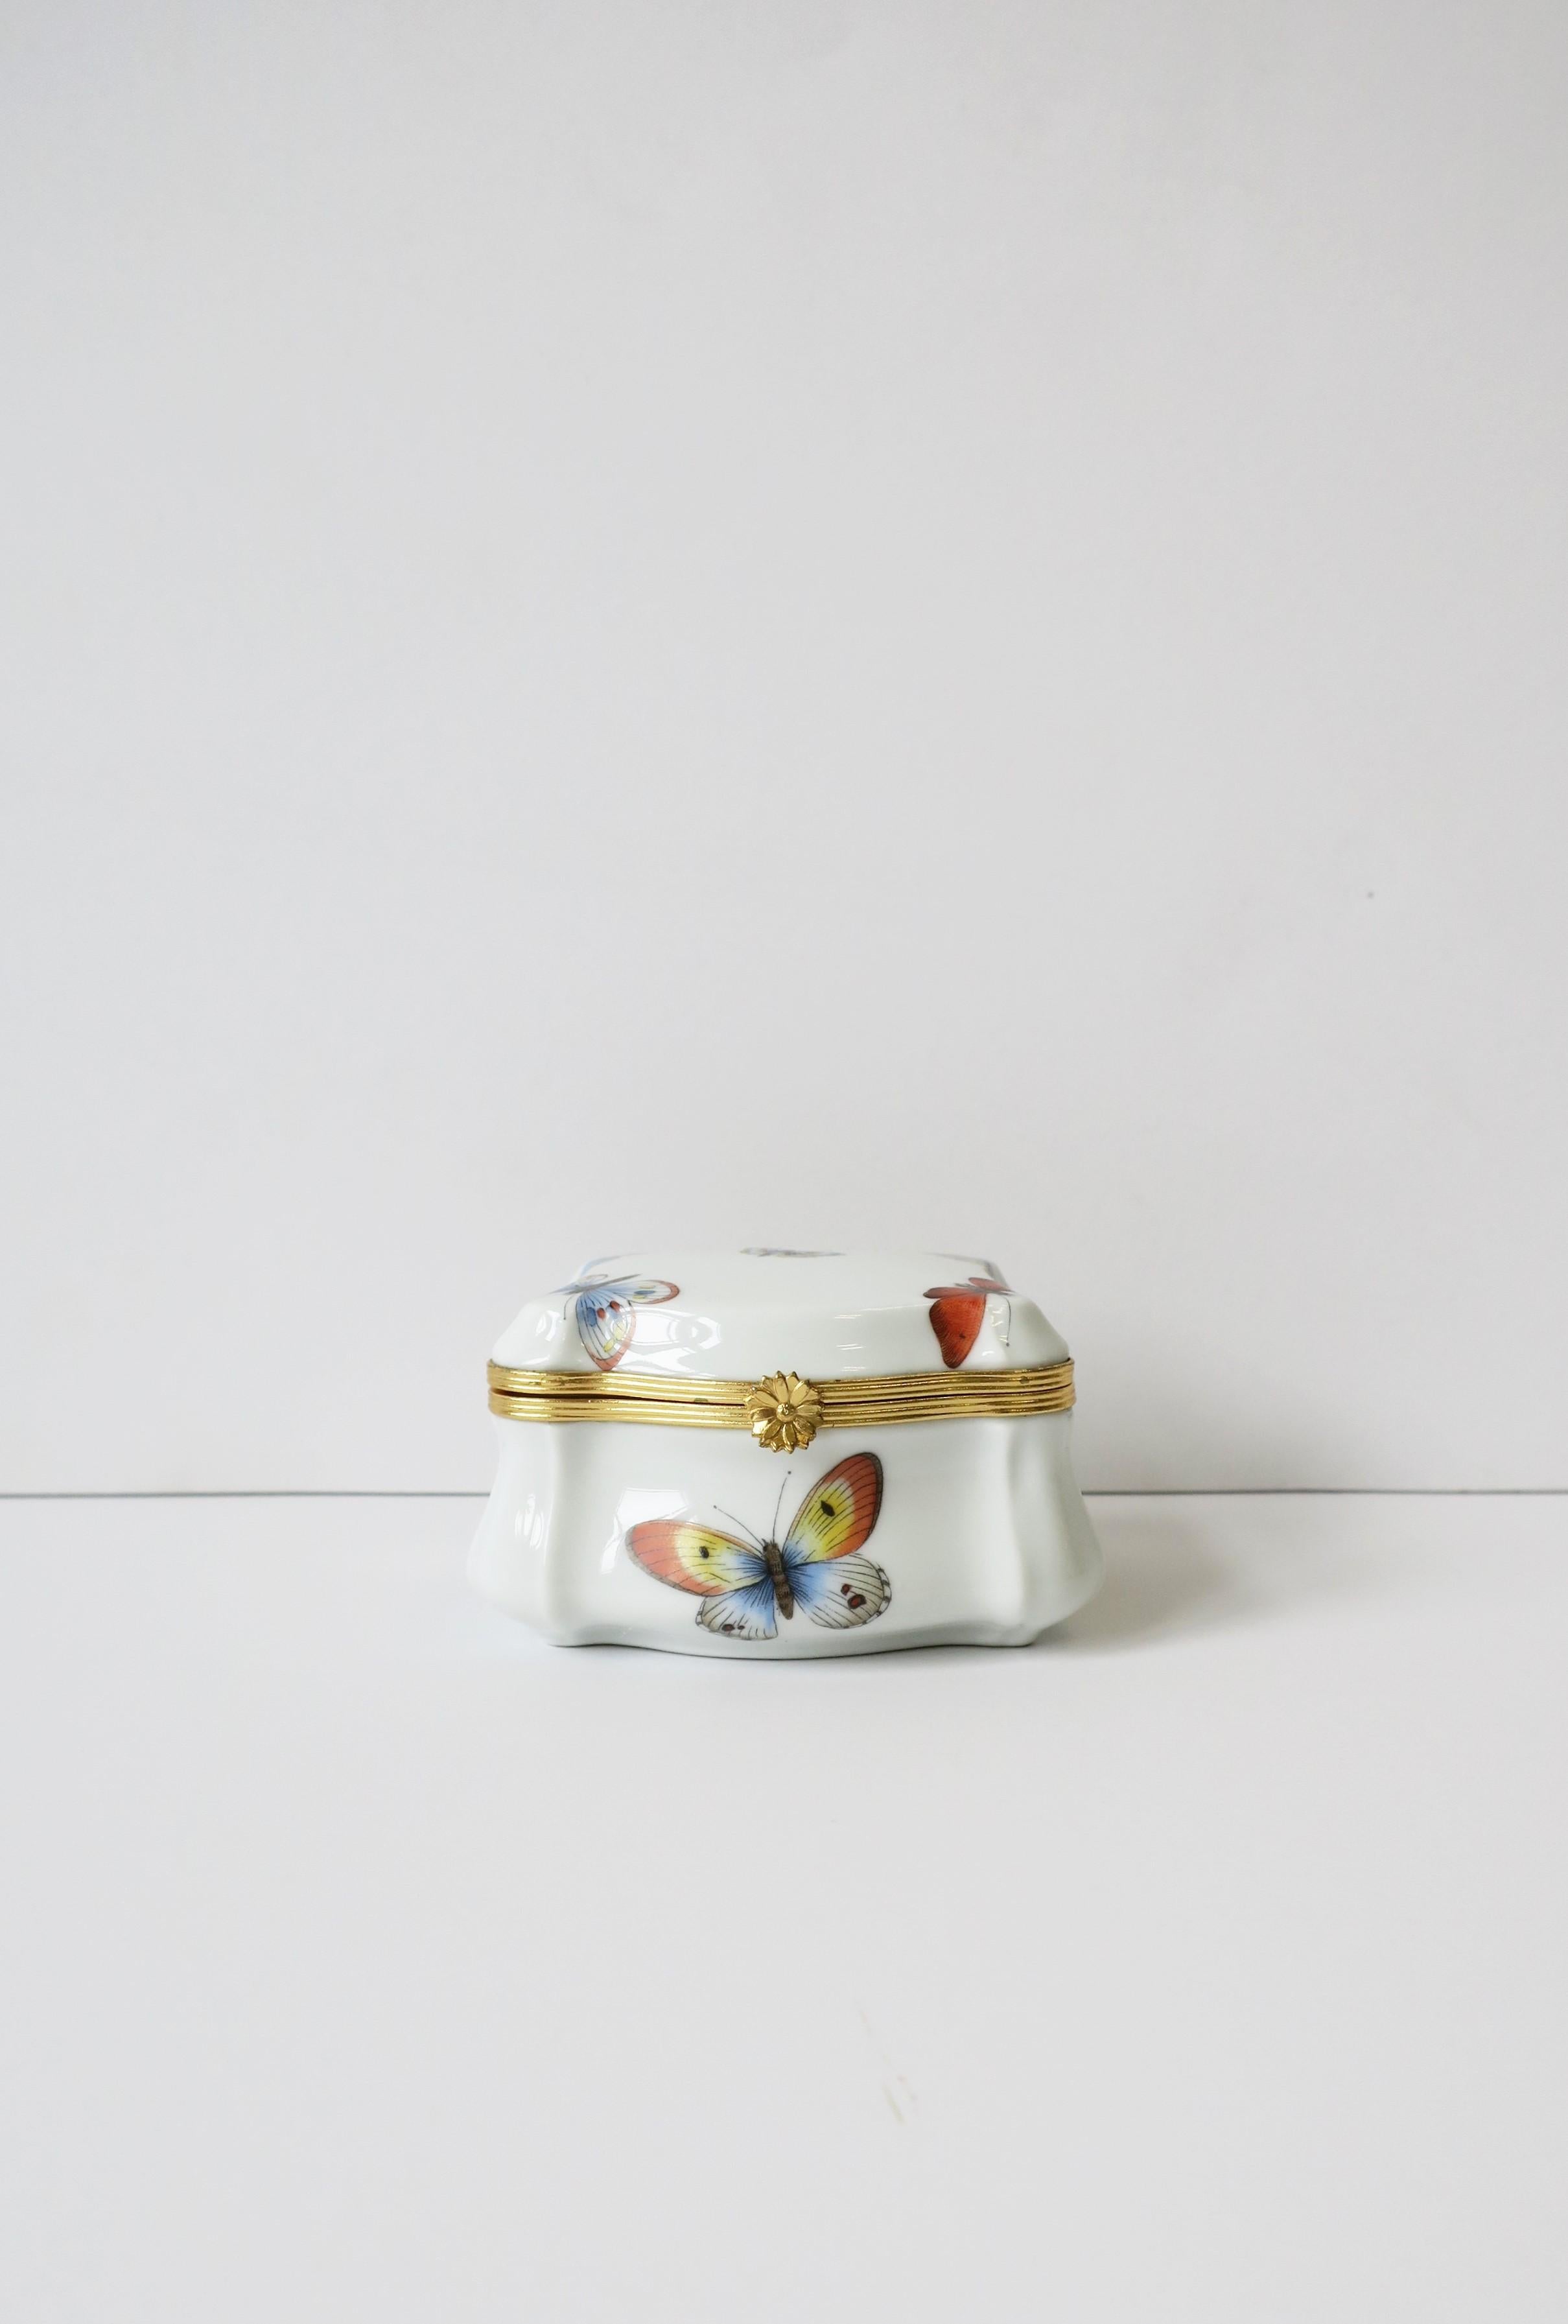 A beautiful French white porcelain and gold brass jewelry box with colorful butterflies, circa mid-20th century, Limoges, France. Great as a standalone piece or to hold jewelry or other small items on a desk, vanity, dresser, nightstand table, etc.